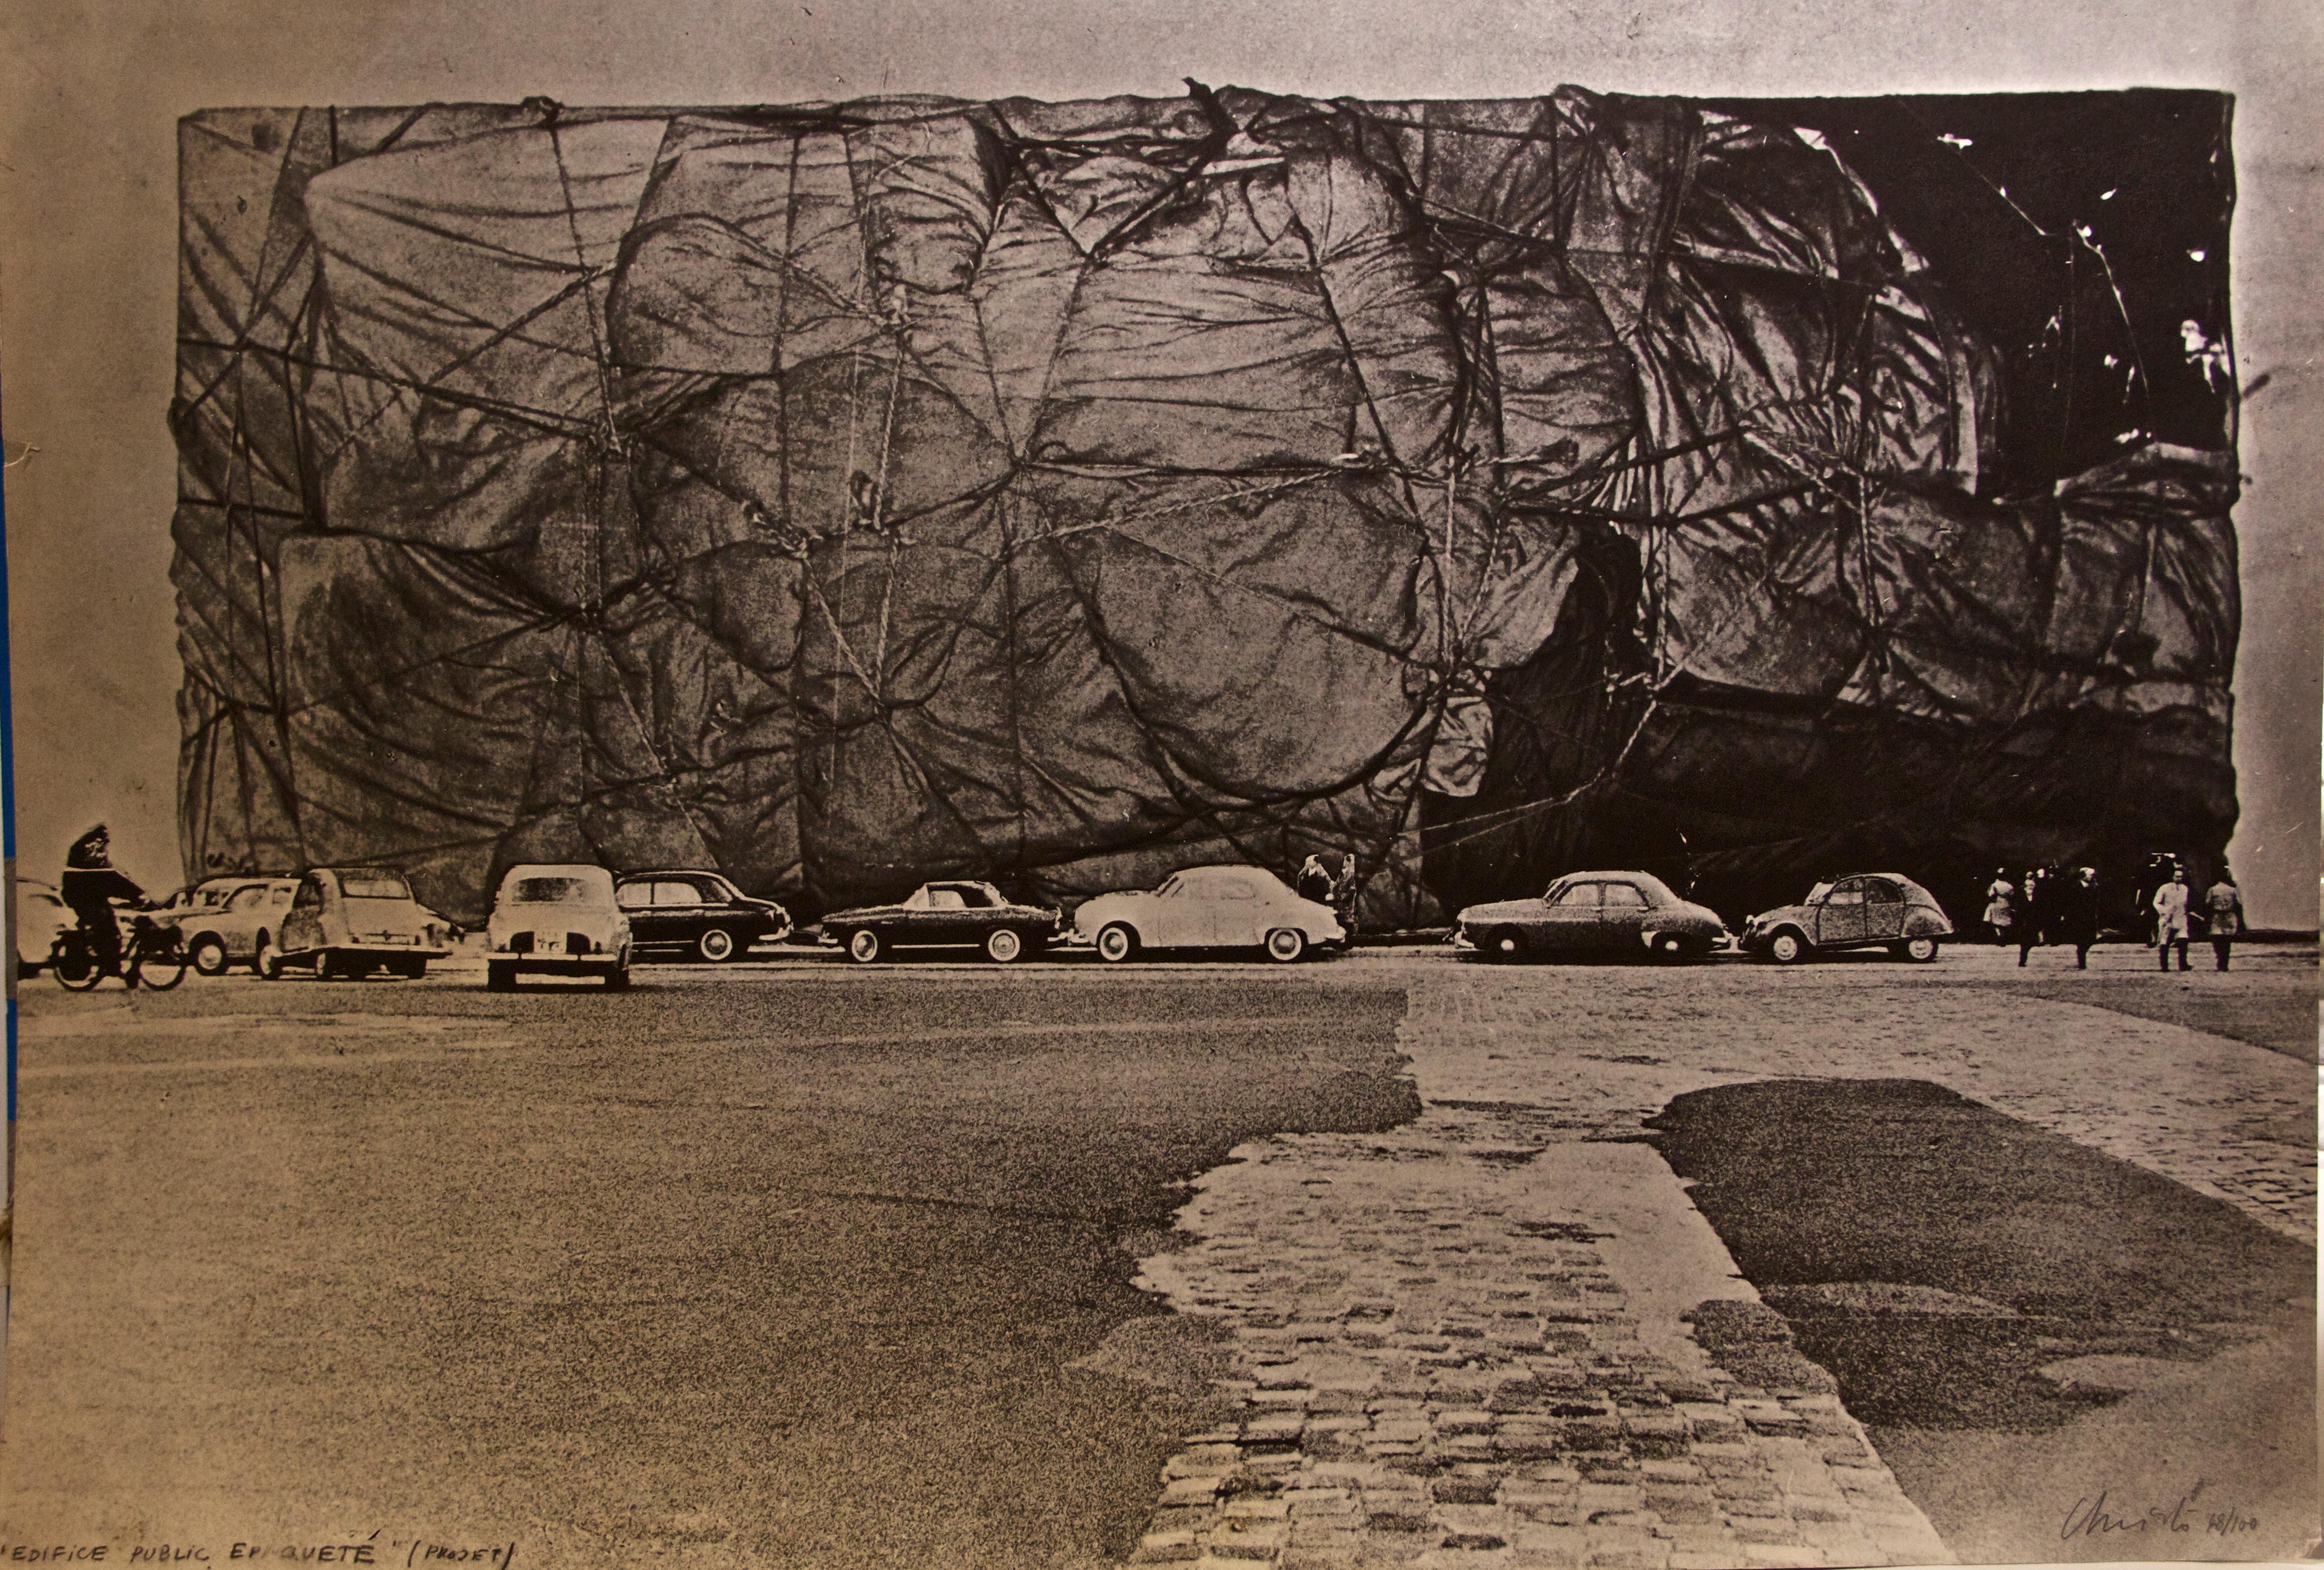 Christo and Jeanne-Claude Landscape Photograph - Project for a Public Building's Packaging - 1971 ca.